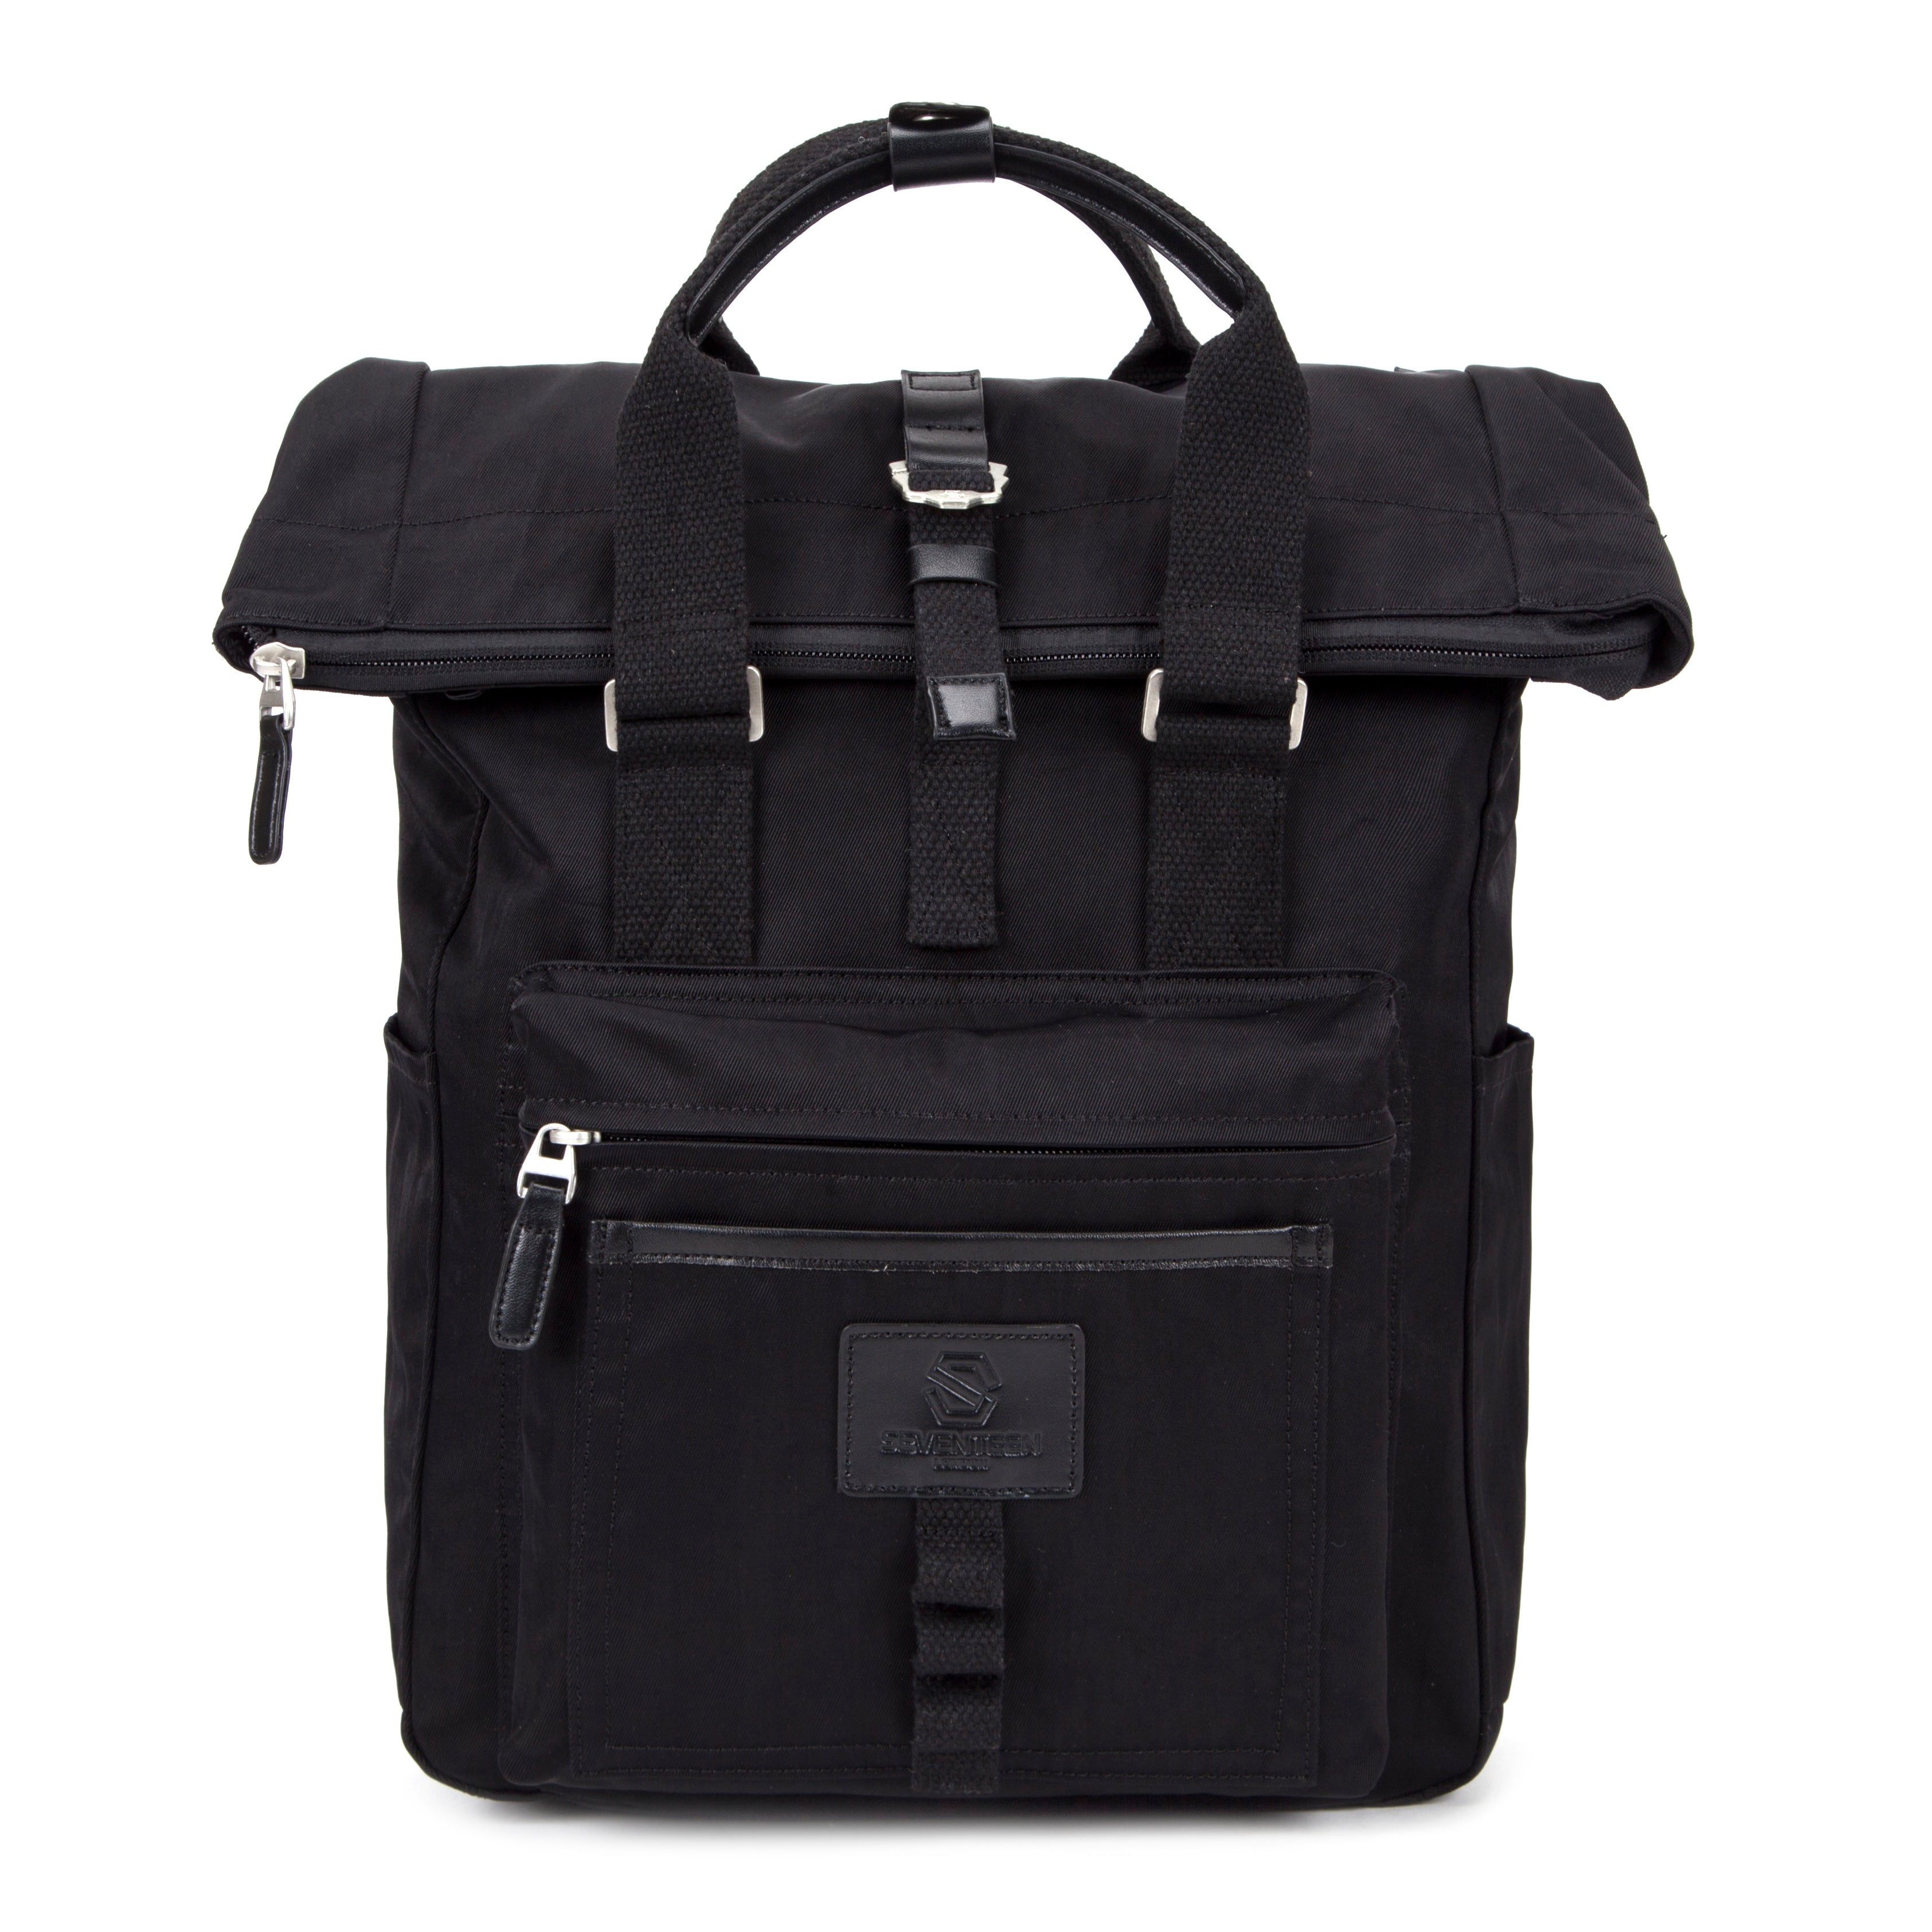 Canary Wharf Backpack - Black with Black - Seventeen London